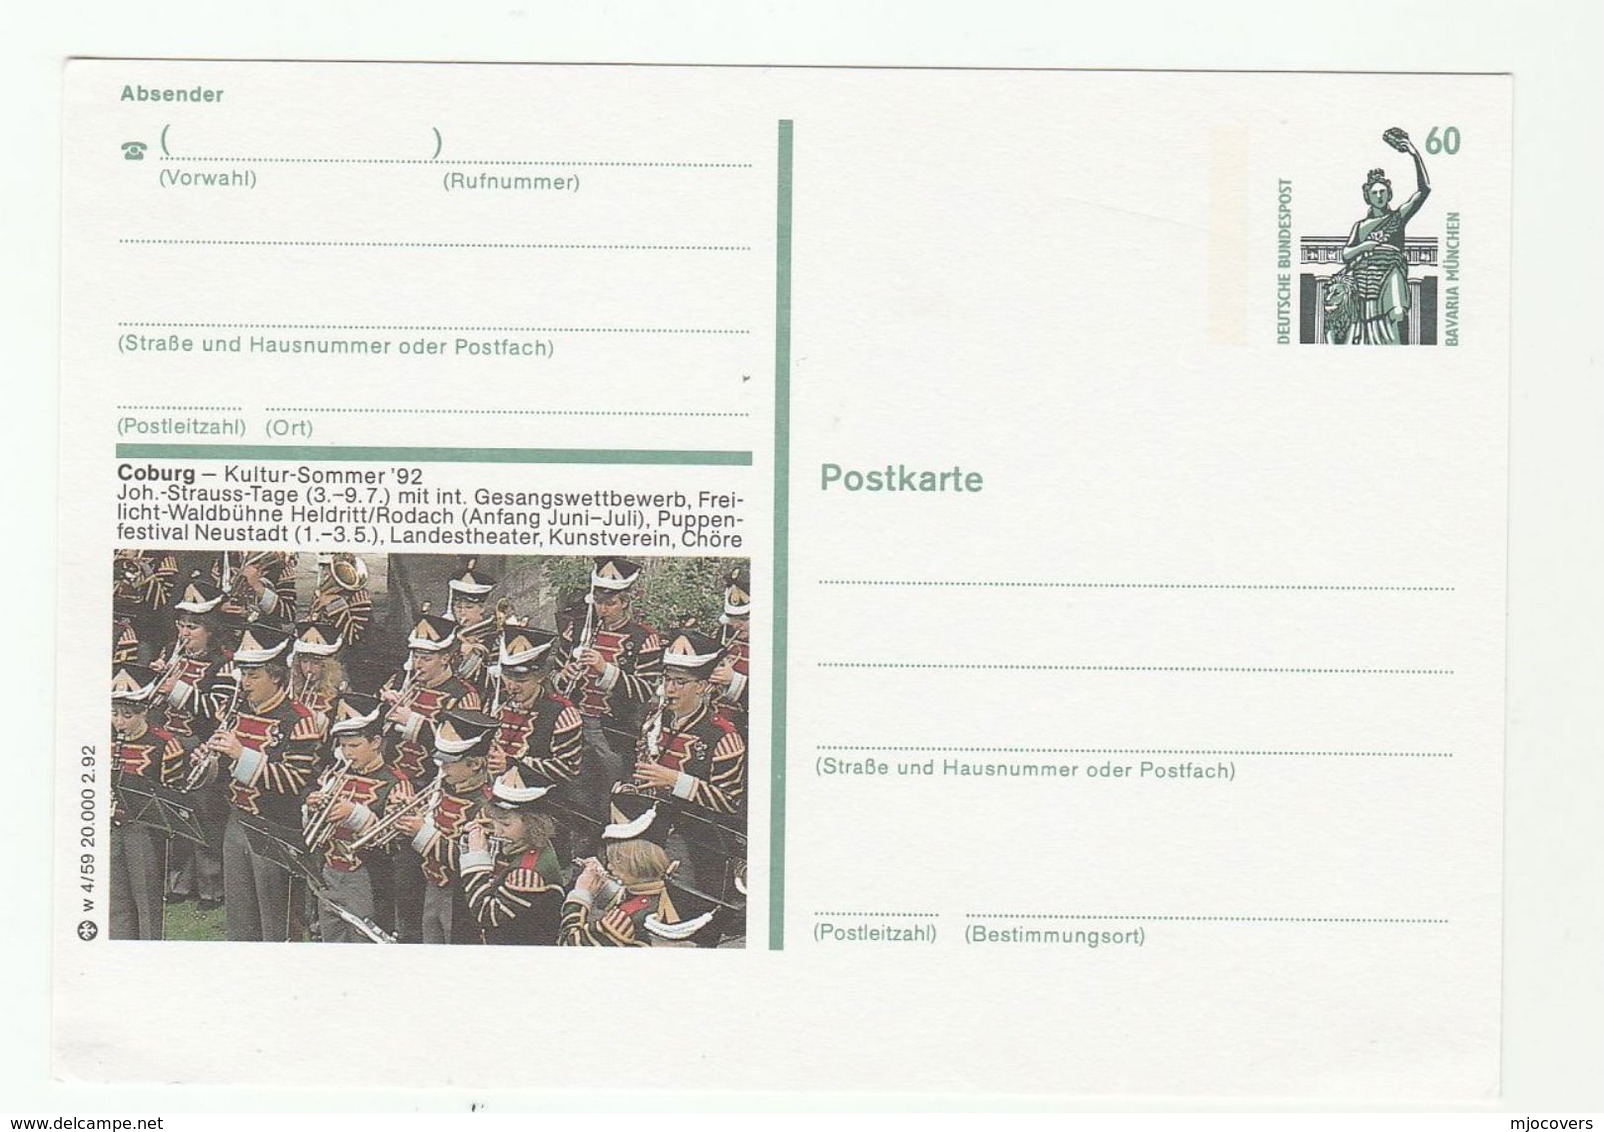 1992 STRAUSS DAY EVENT MUSIC  COBURG Germany Postal STATIONERY CARD Illus Cover Stamps - Music